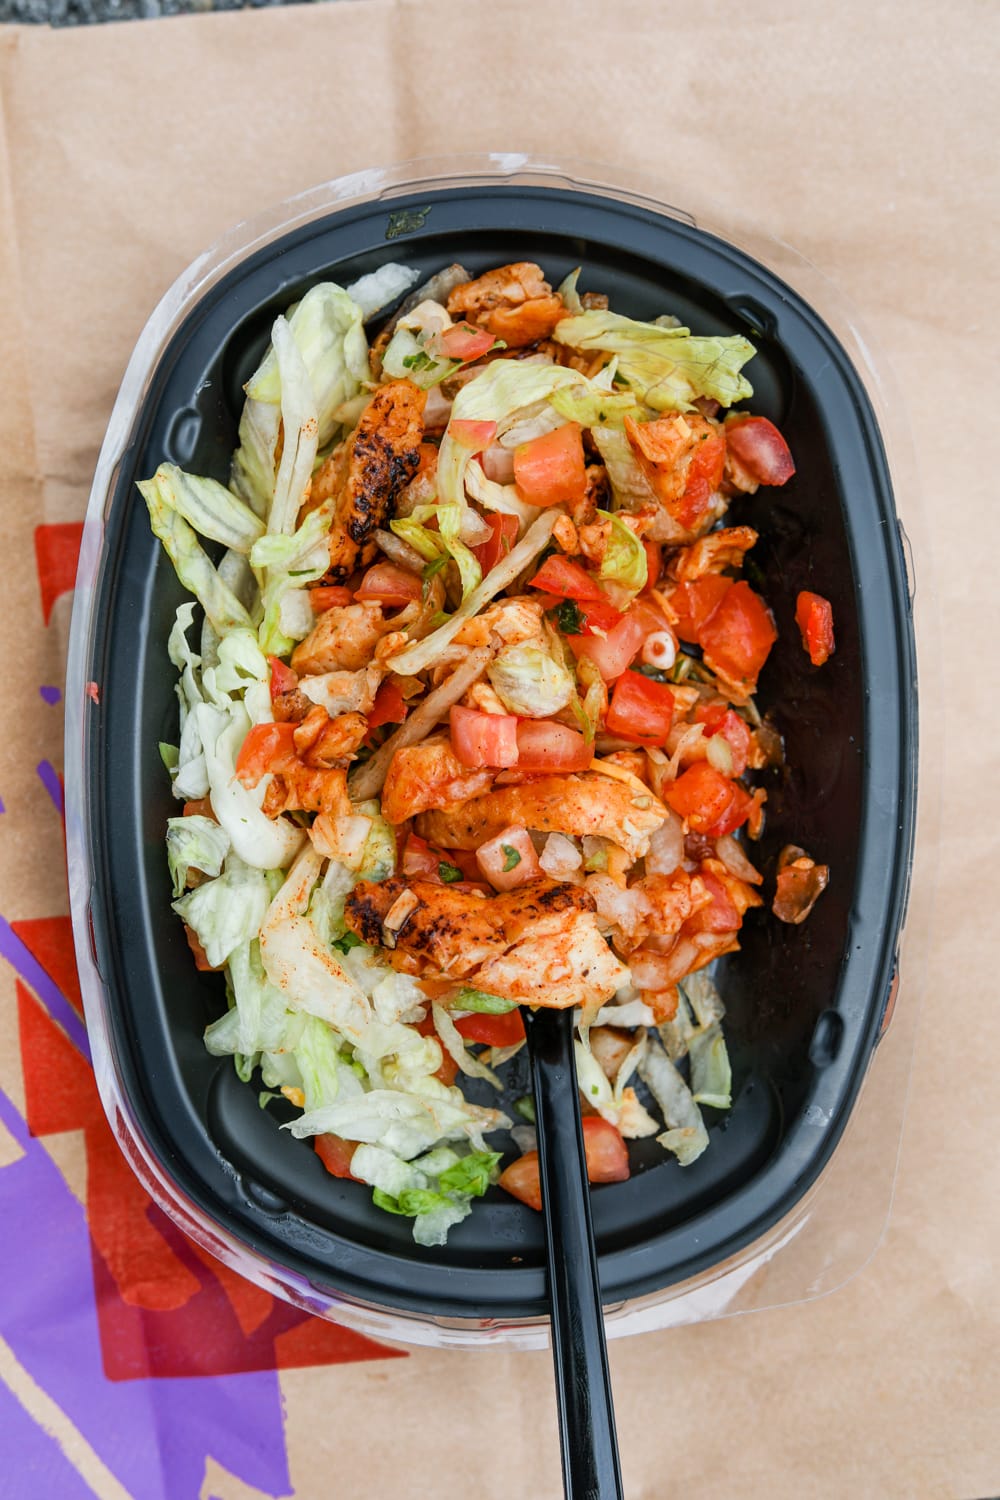 Shredded lettuce, pico de gallo, and char-grilled chicken in a small black bowl.